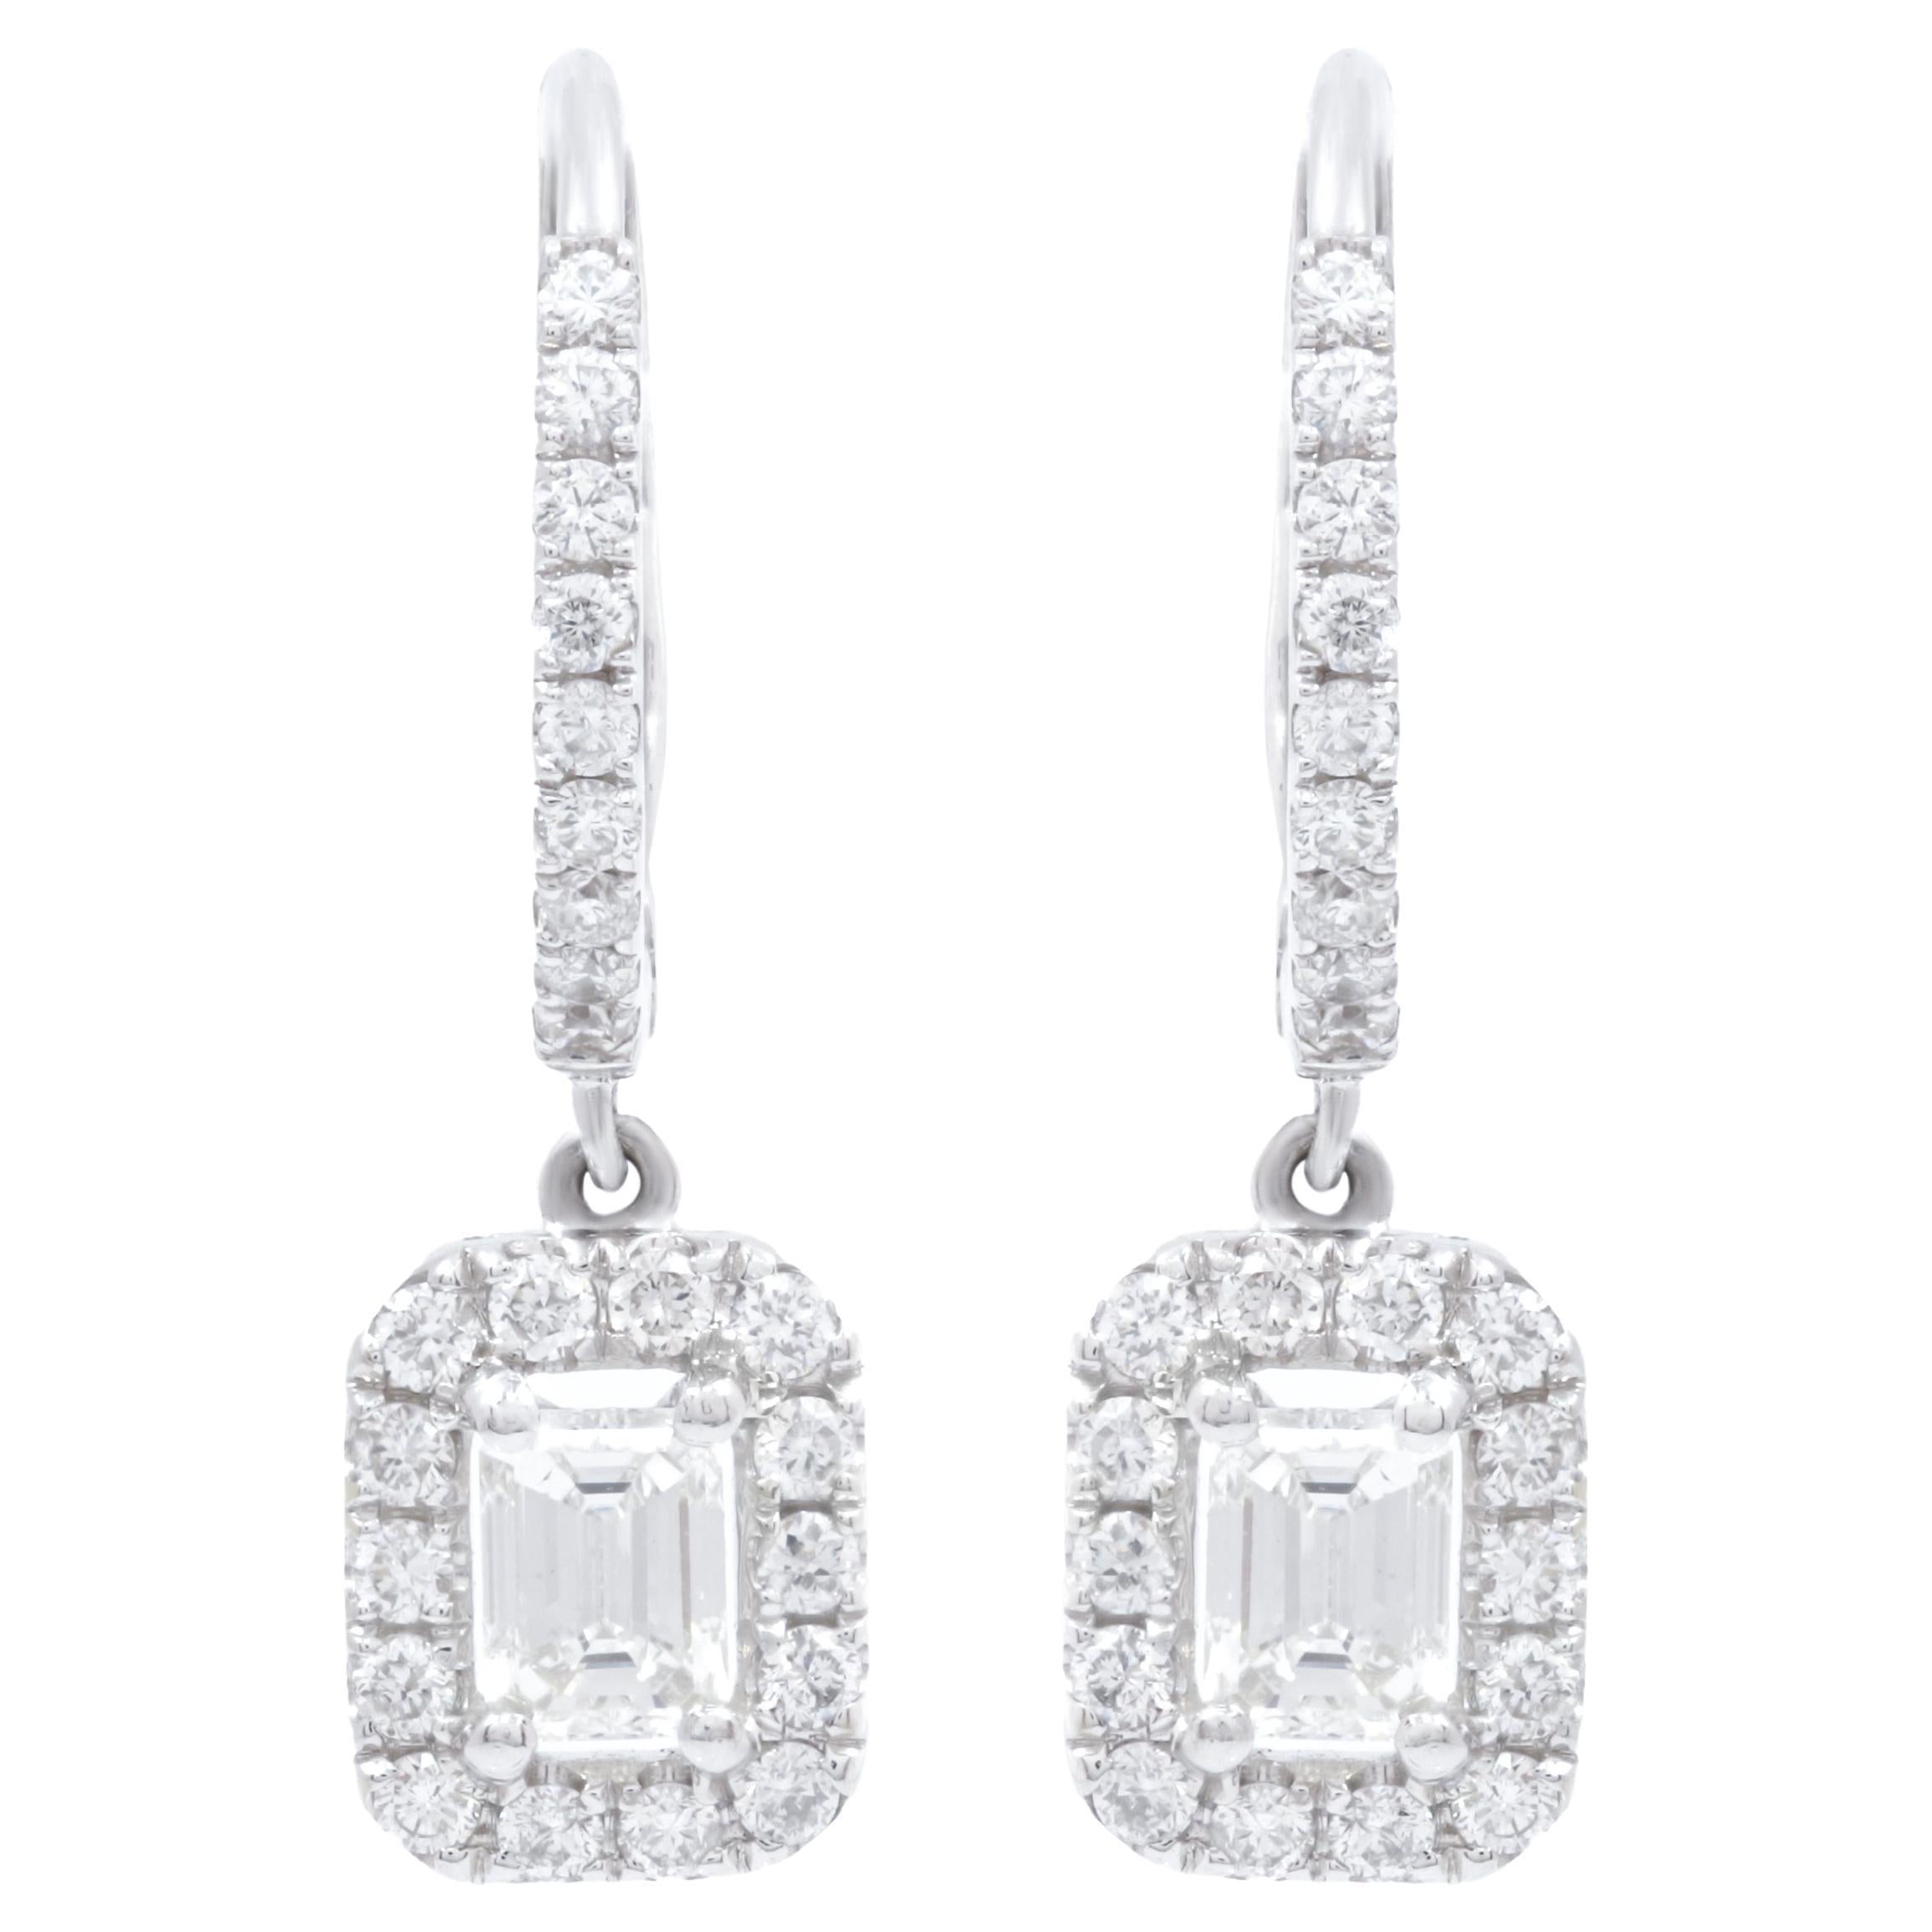 Diana M. 18kt white gold hanging earrings featuring 1.00cts of daimnds w/emerald For Sale